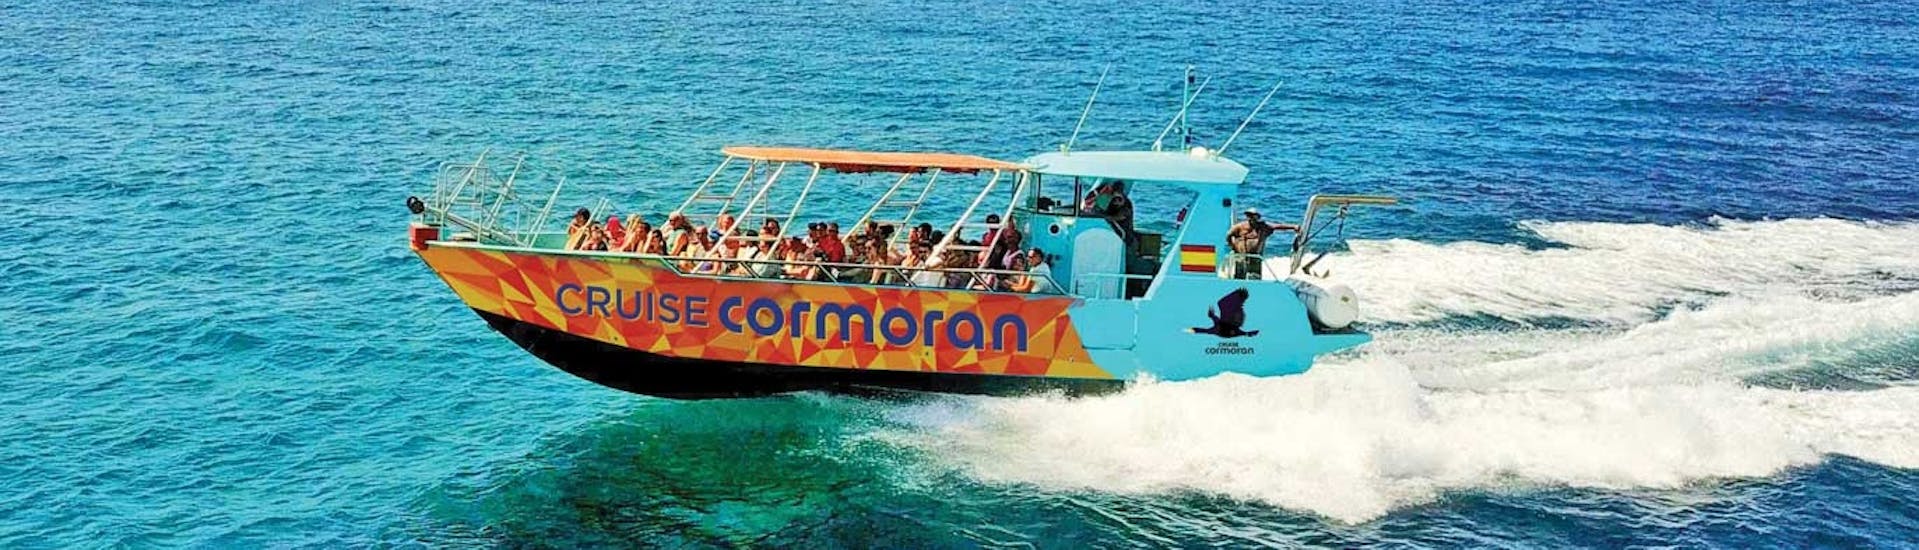 The Explorer boat during a Boat Trip from Palma to Cabrera Island with Swimming with Cormoran Cruises Paguera.